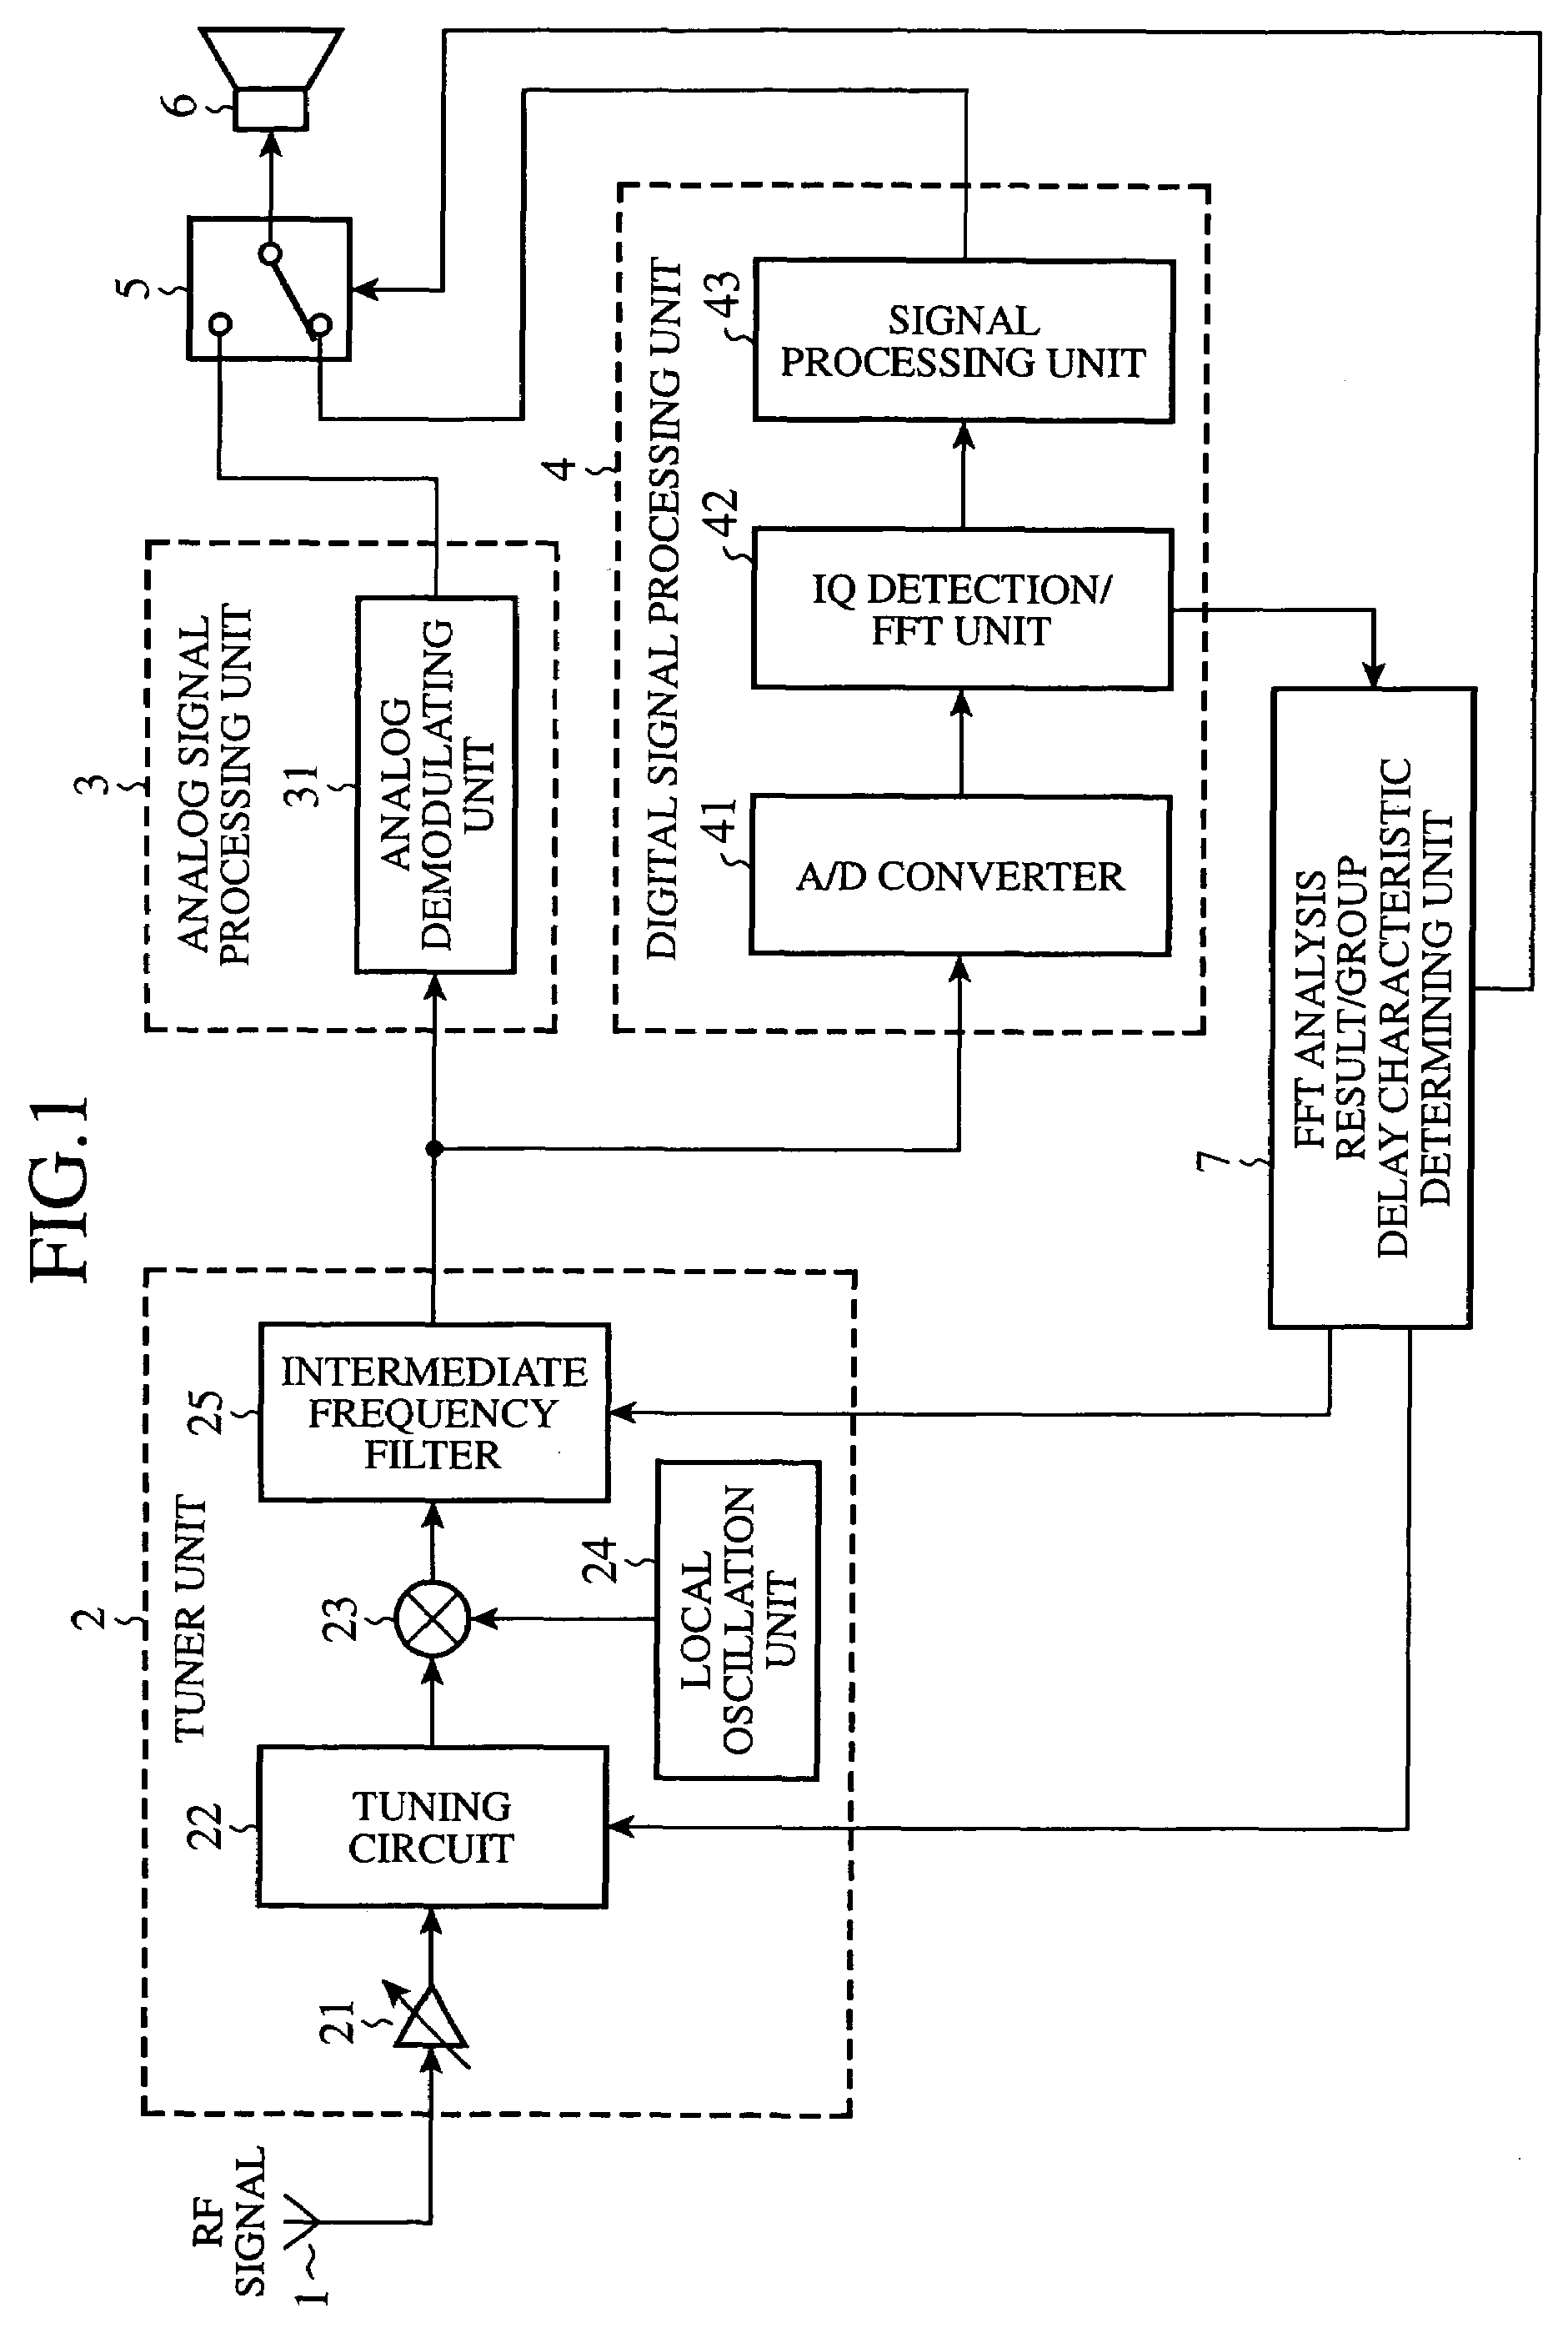 Receiver capable of switching between digital and analog broadcasting signals